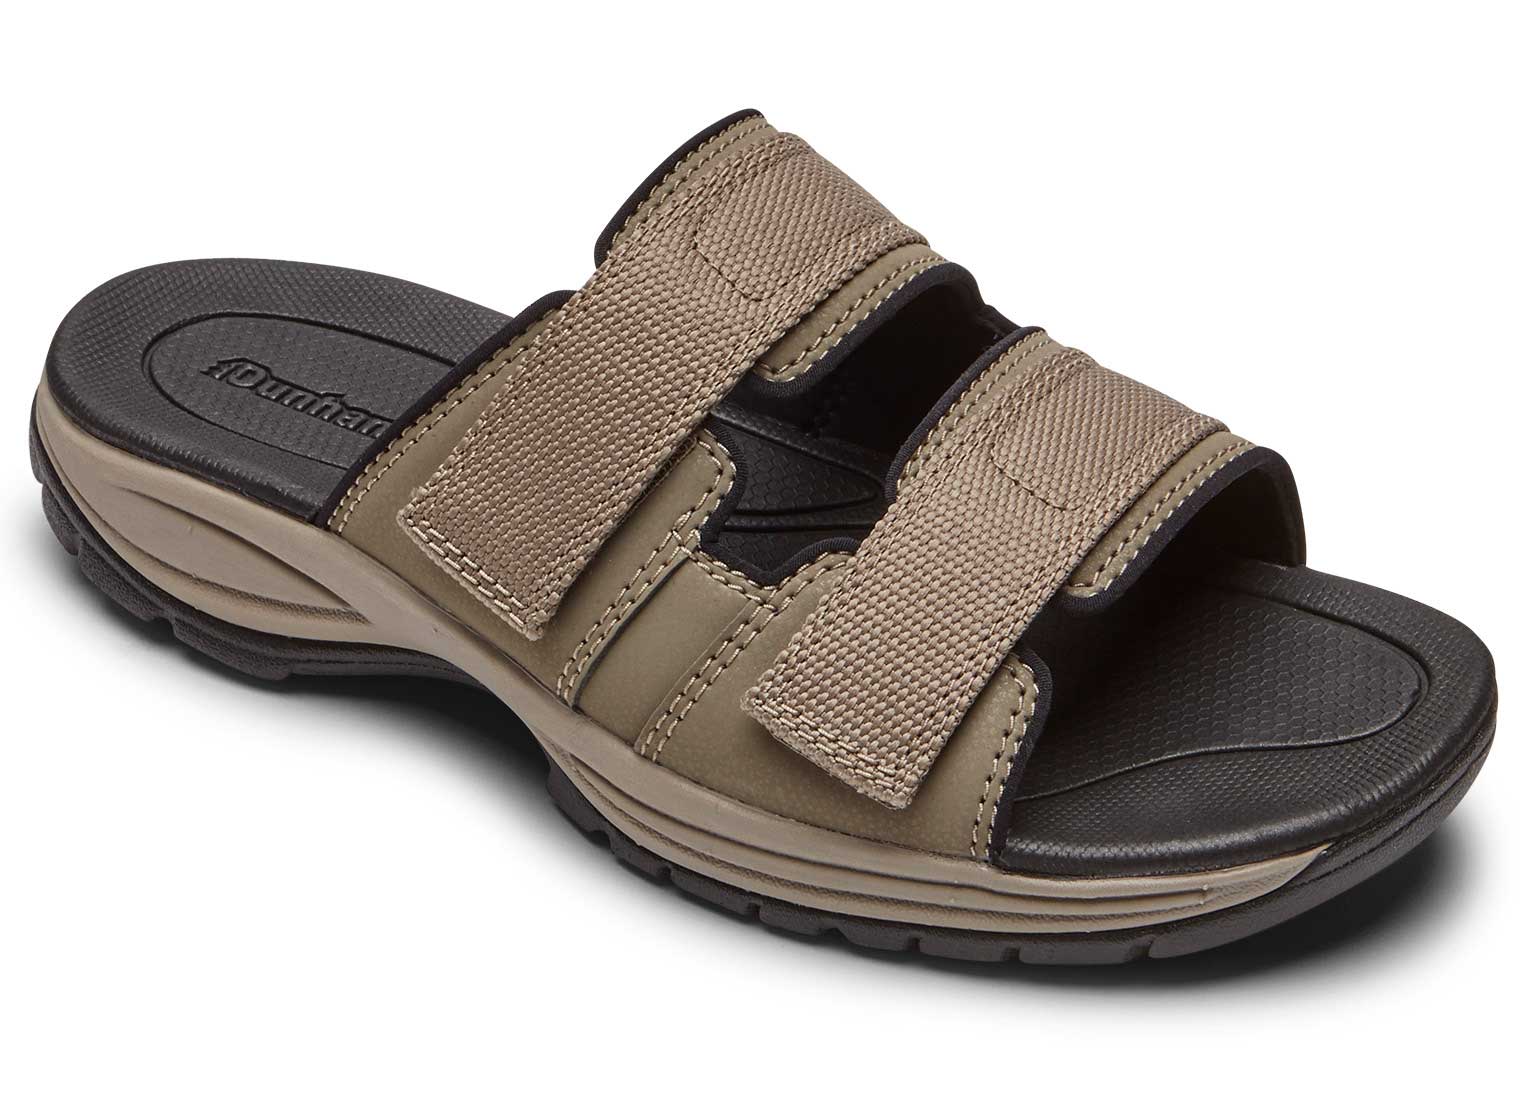 http://www.innovateistore.com/Shared/Images/Product/Dunham-Newport-Slide-Water-Friendly-CH9117-Men-s-Taupe-Water-Friendly-Sandal-Slip-Resistant-with-Nylon-Shank/CH9117_MAIN.jpg